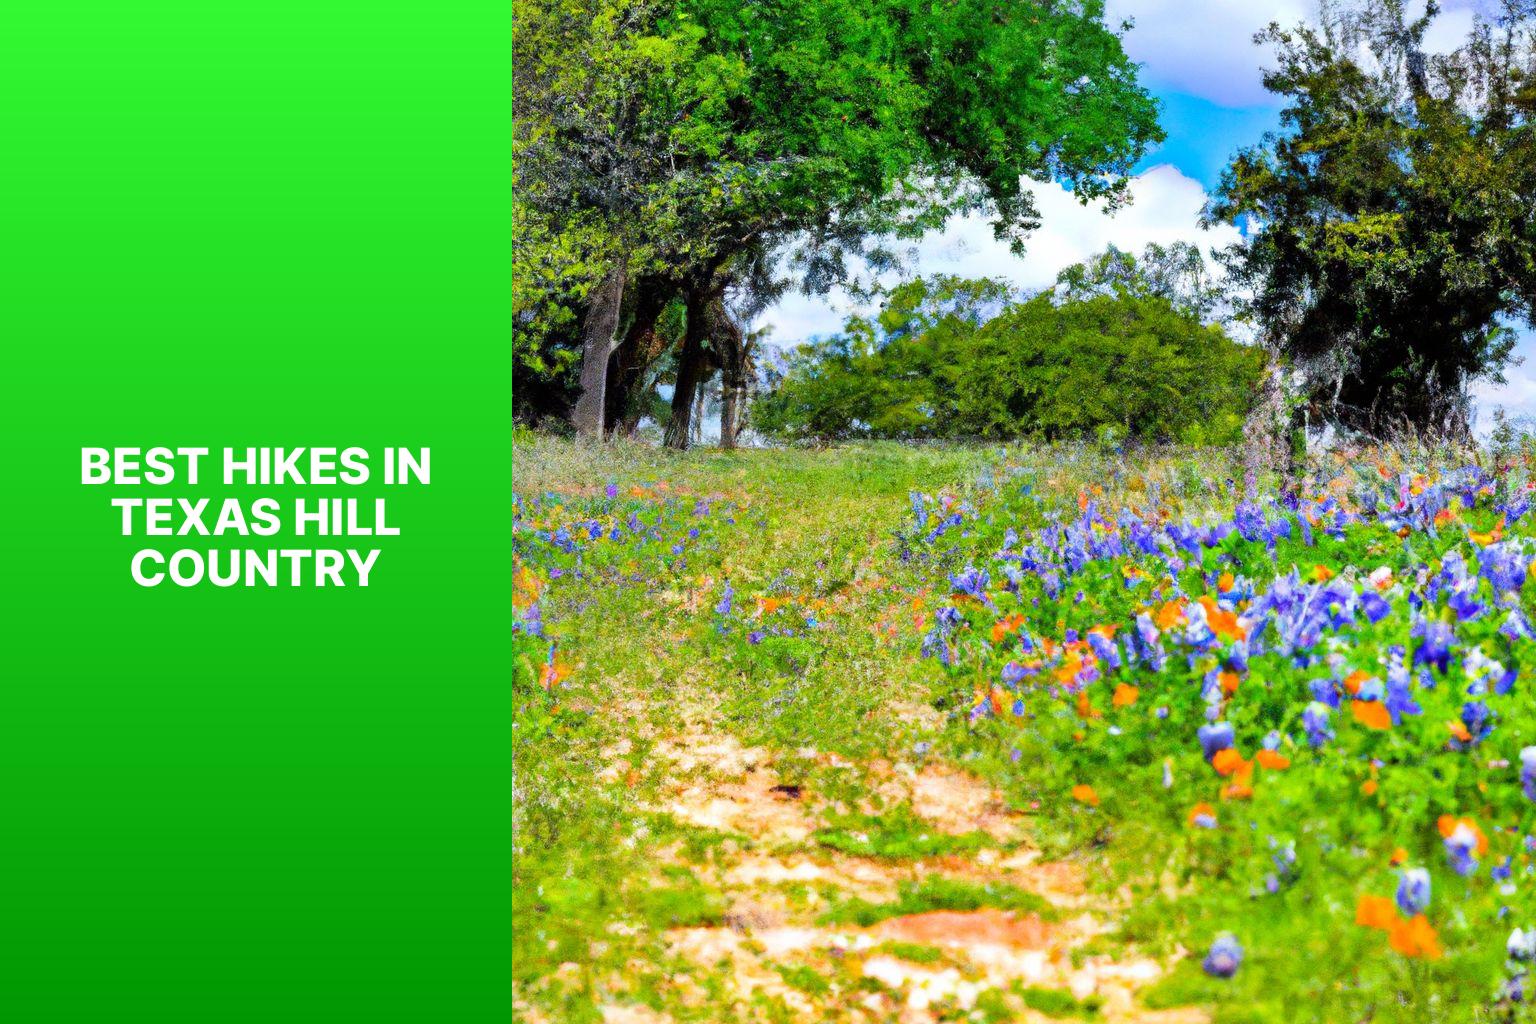 best hikes in texas hill country9rg7